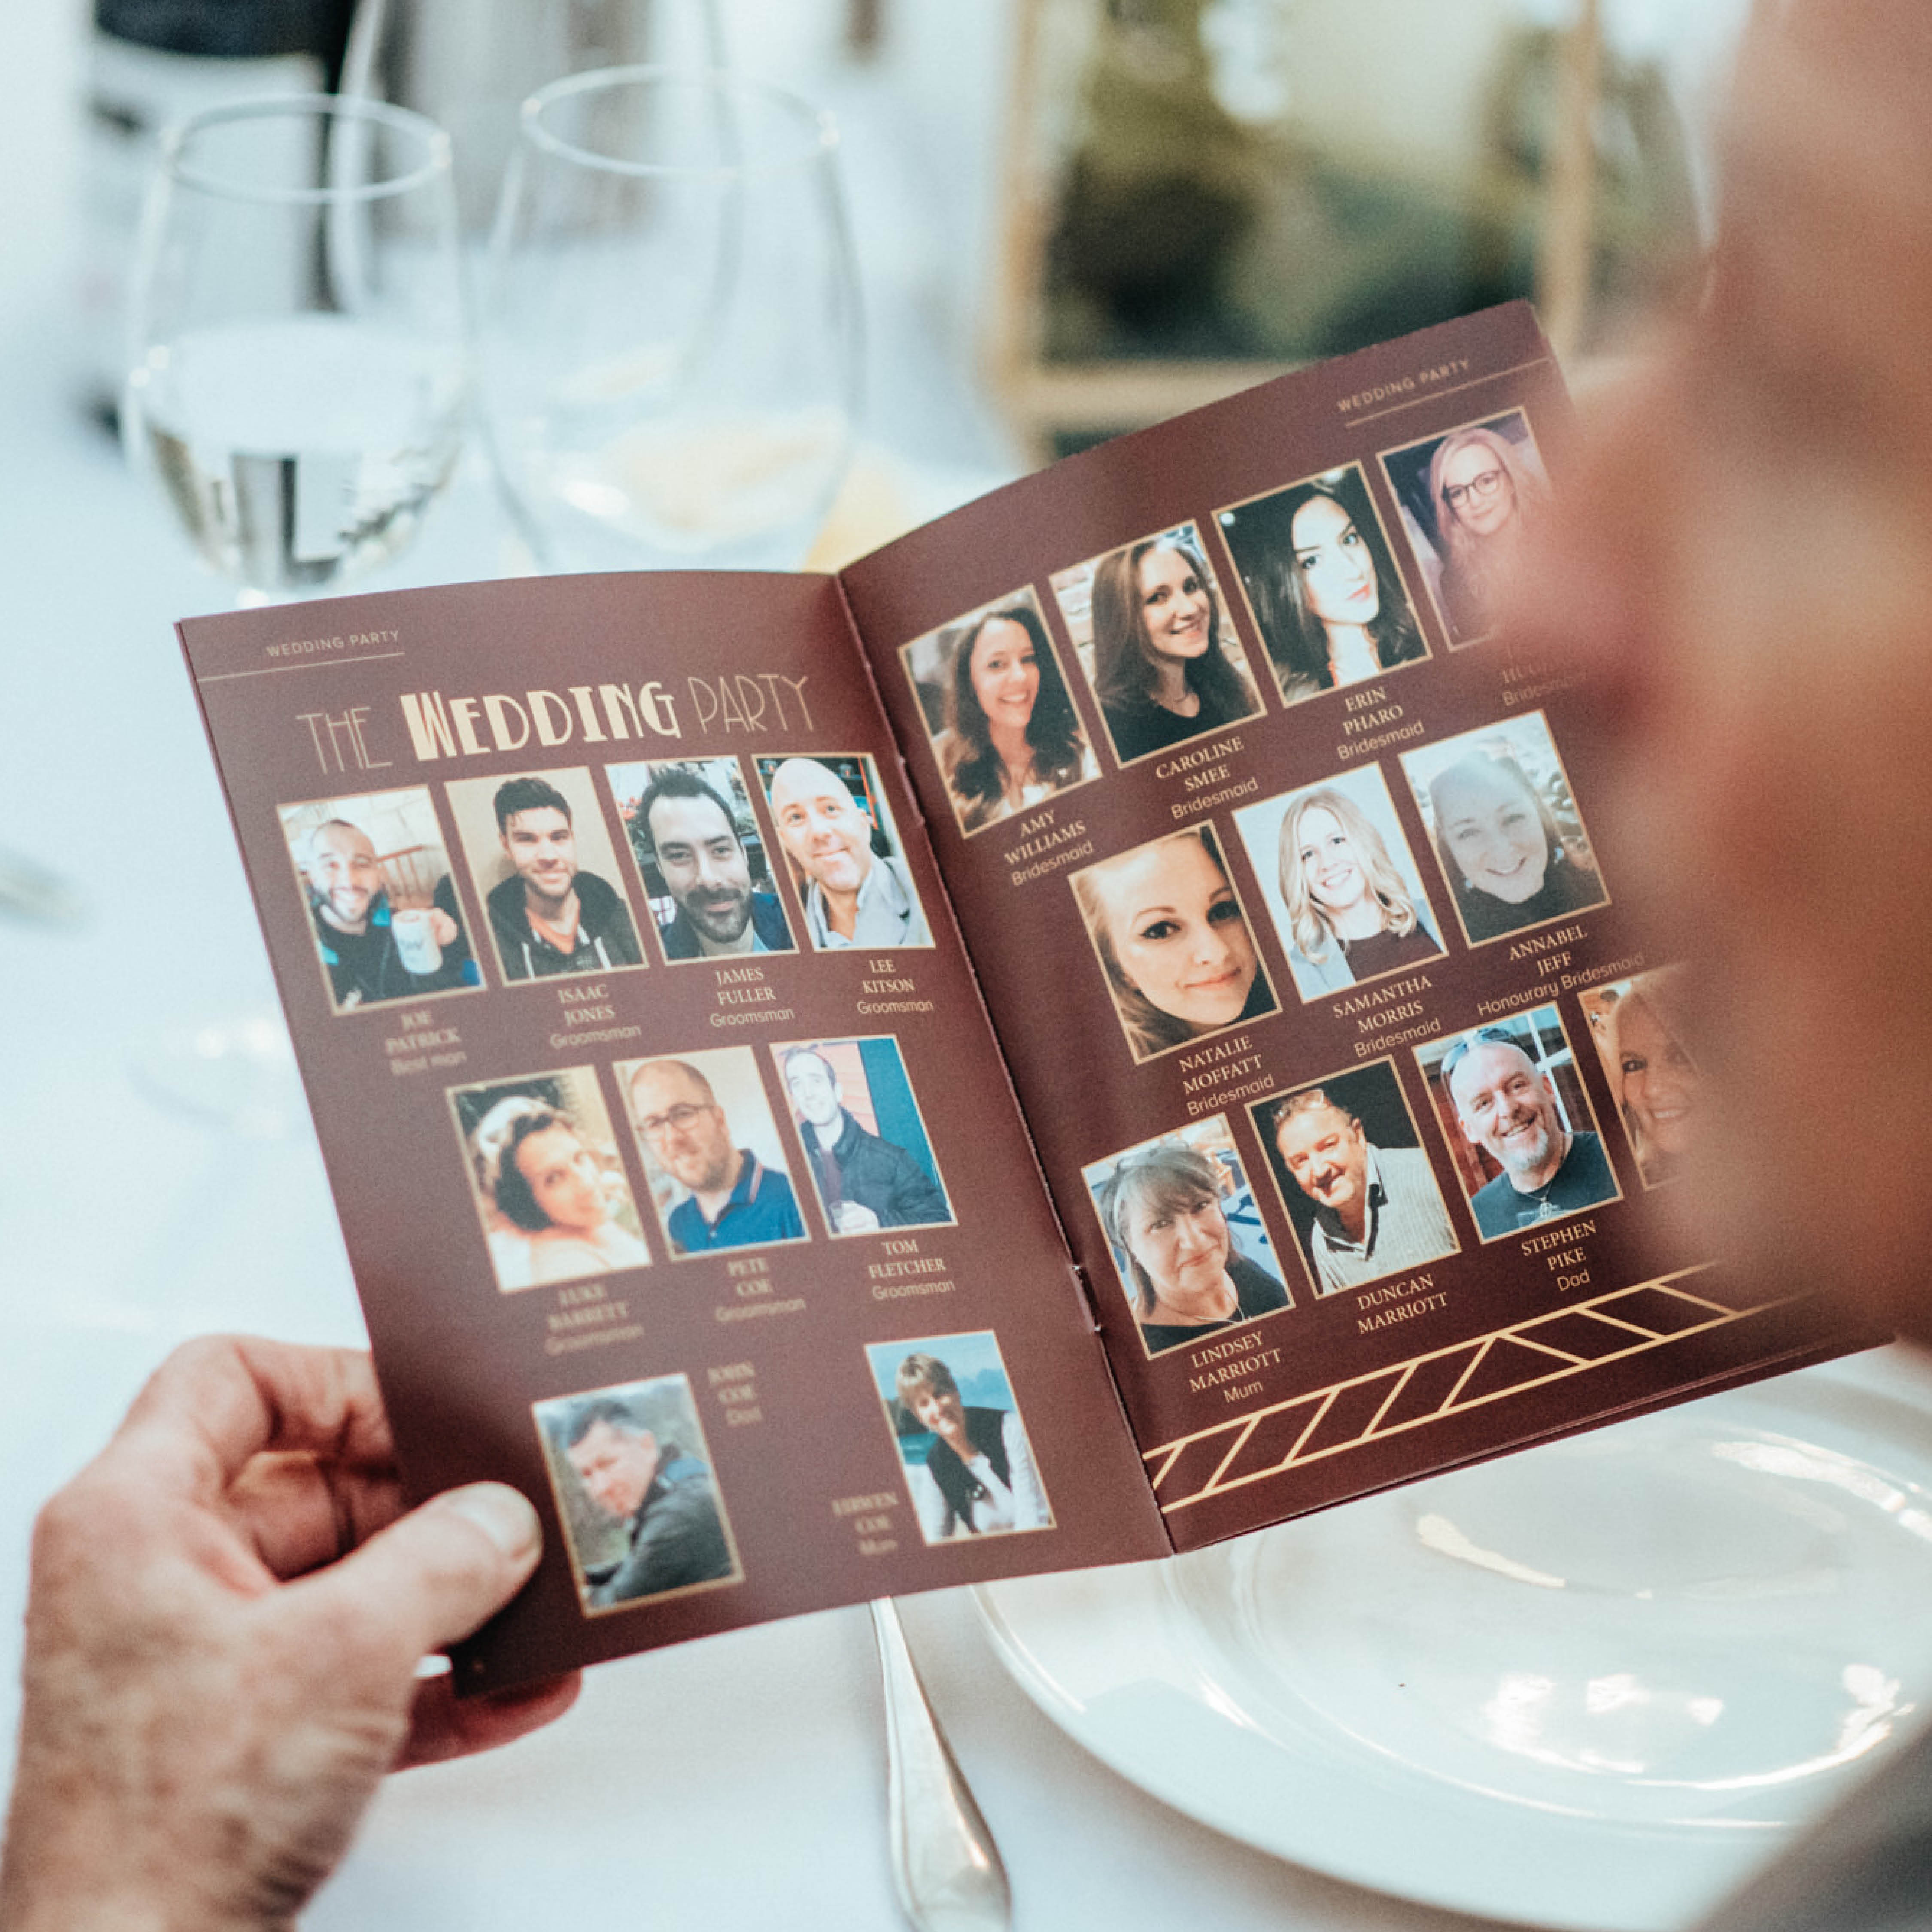 How to make your wedding day unforgettable, personalised wedding wedition magazine